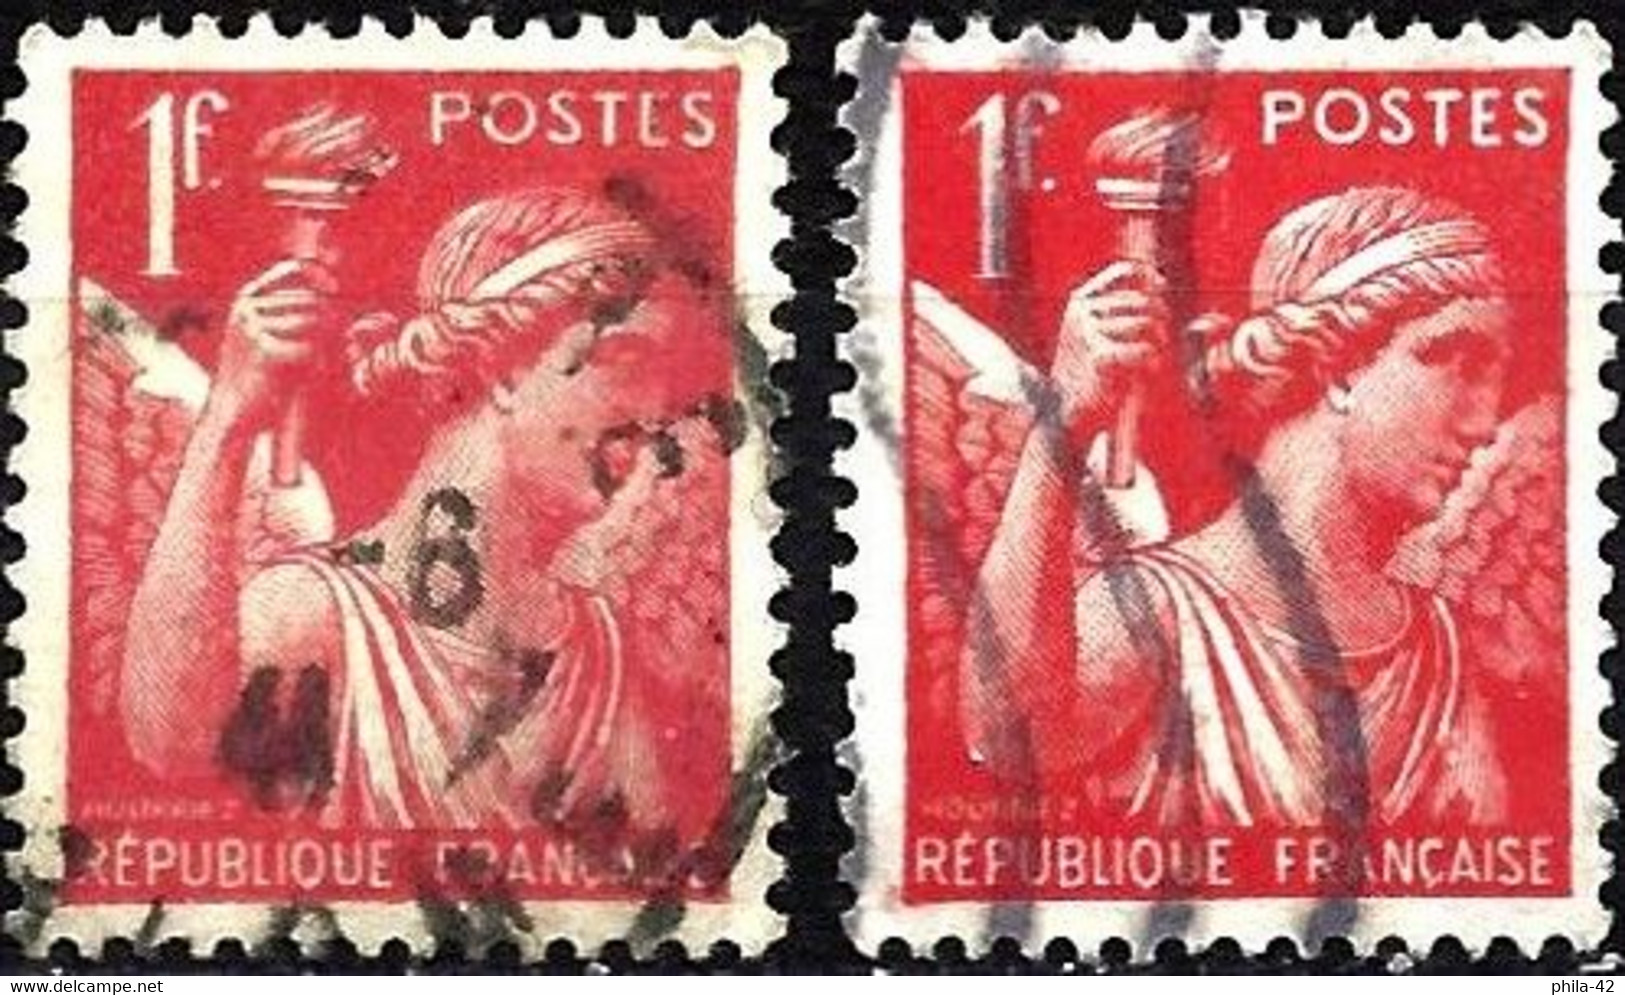 France 1940 - Mi 395 - YT 433 ( Type Iris ) Two Shades Of Color - Used Stamps